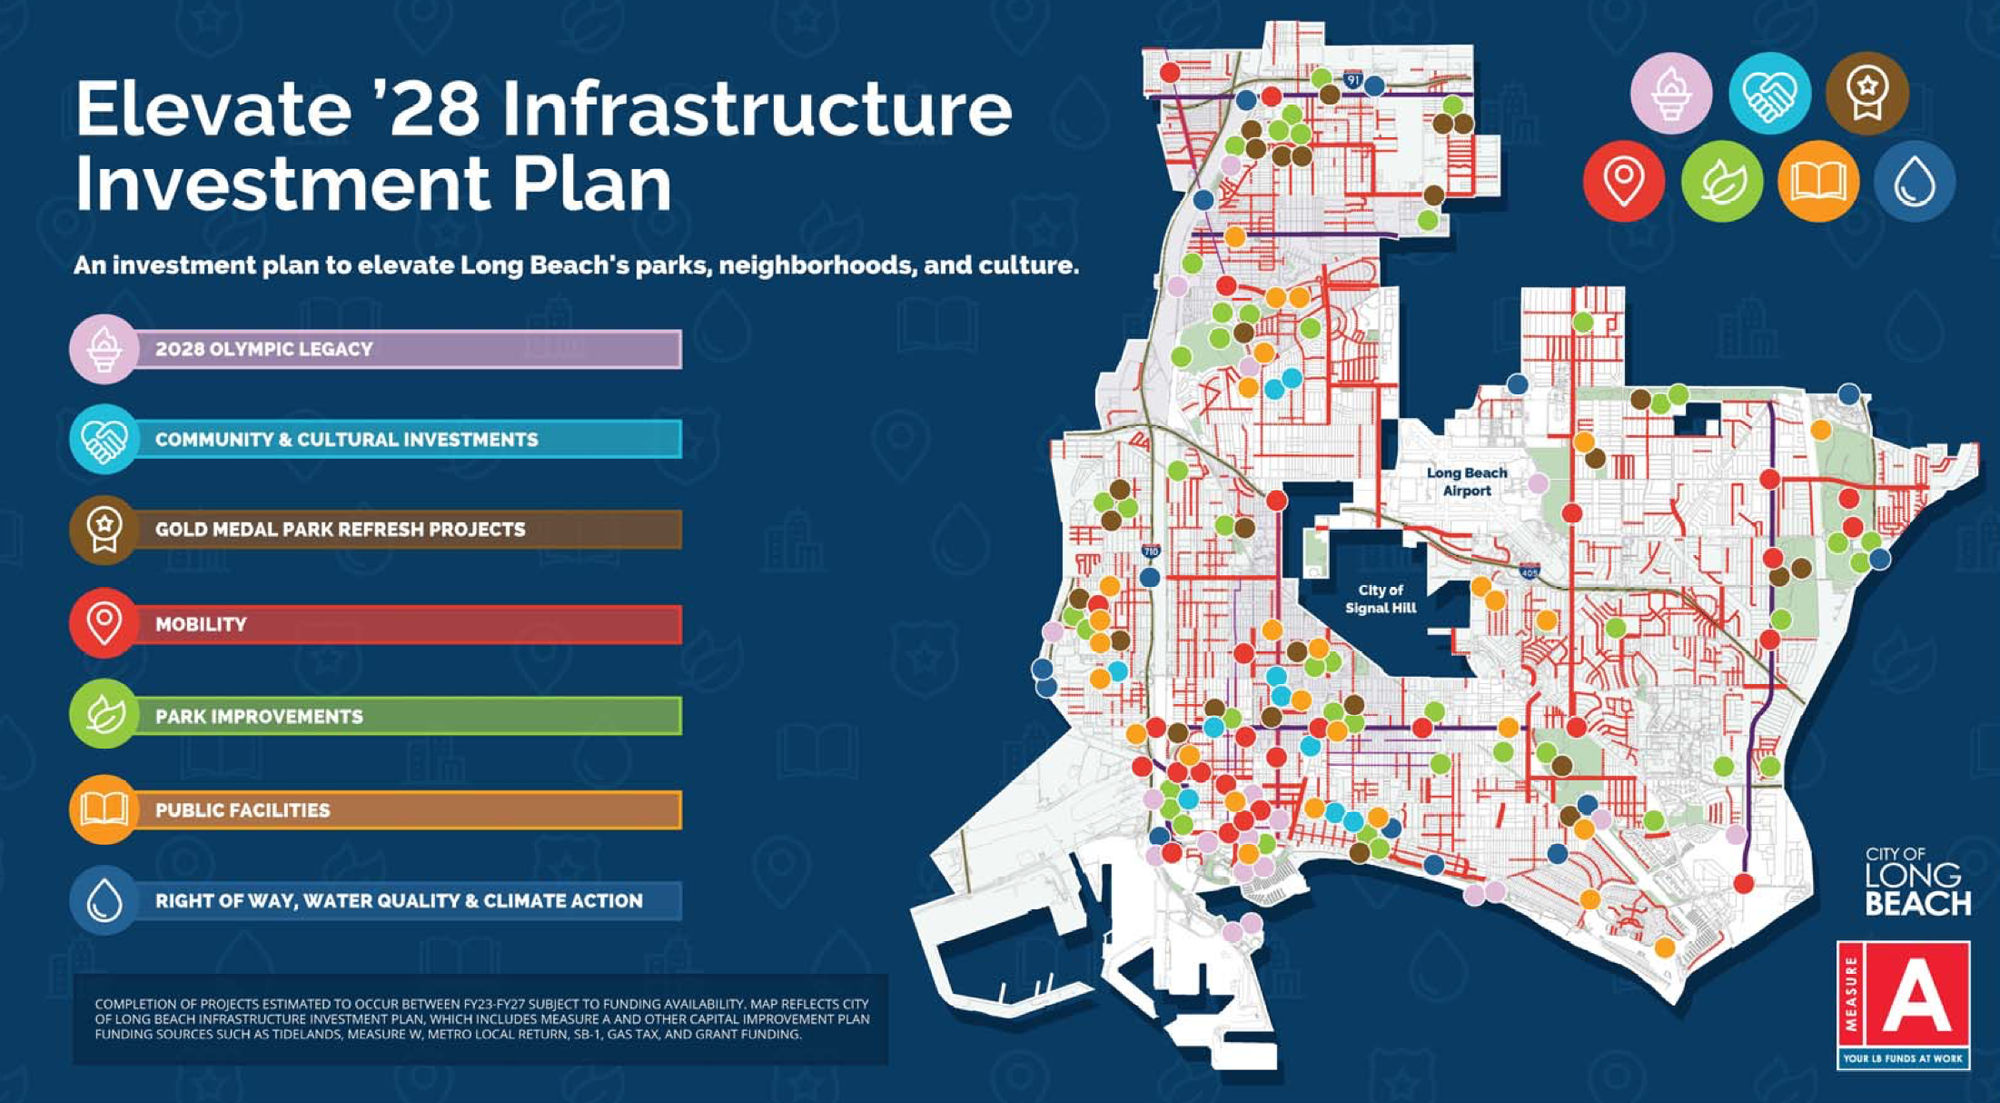 A map of Long Beach's Elevate 28 Infrastructure Investment Plan that shows where Olympic legacy projects will be completed